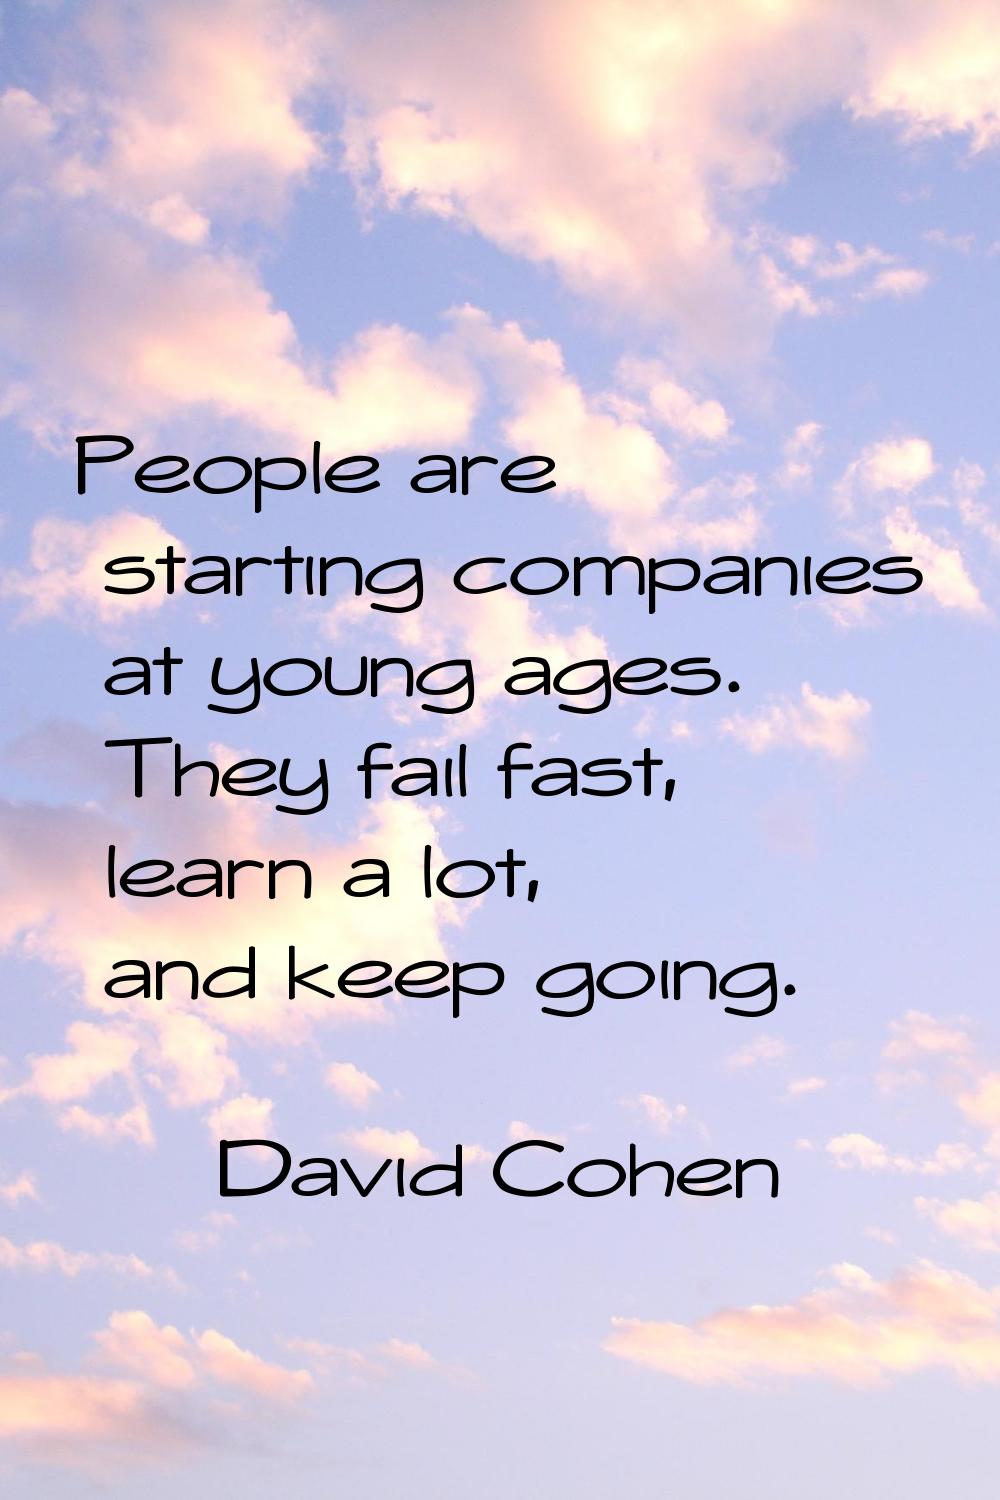 People are starting companies at young ages. They fail fast, learn a lot, and keep going.